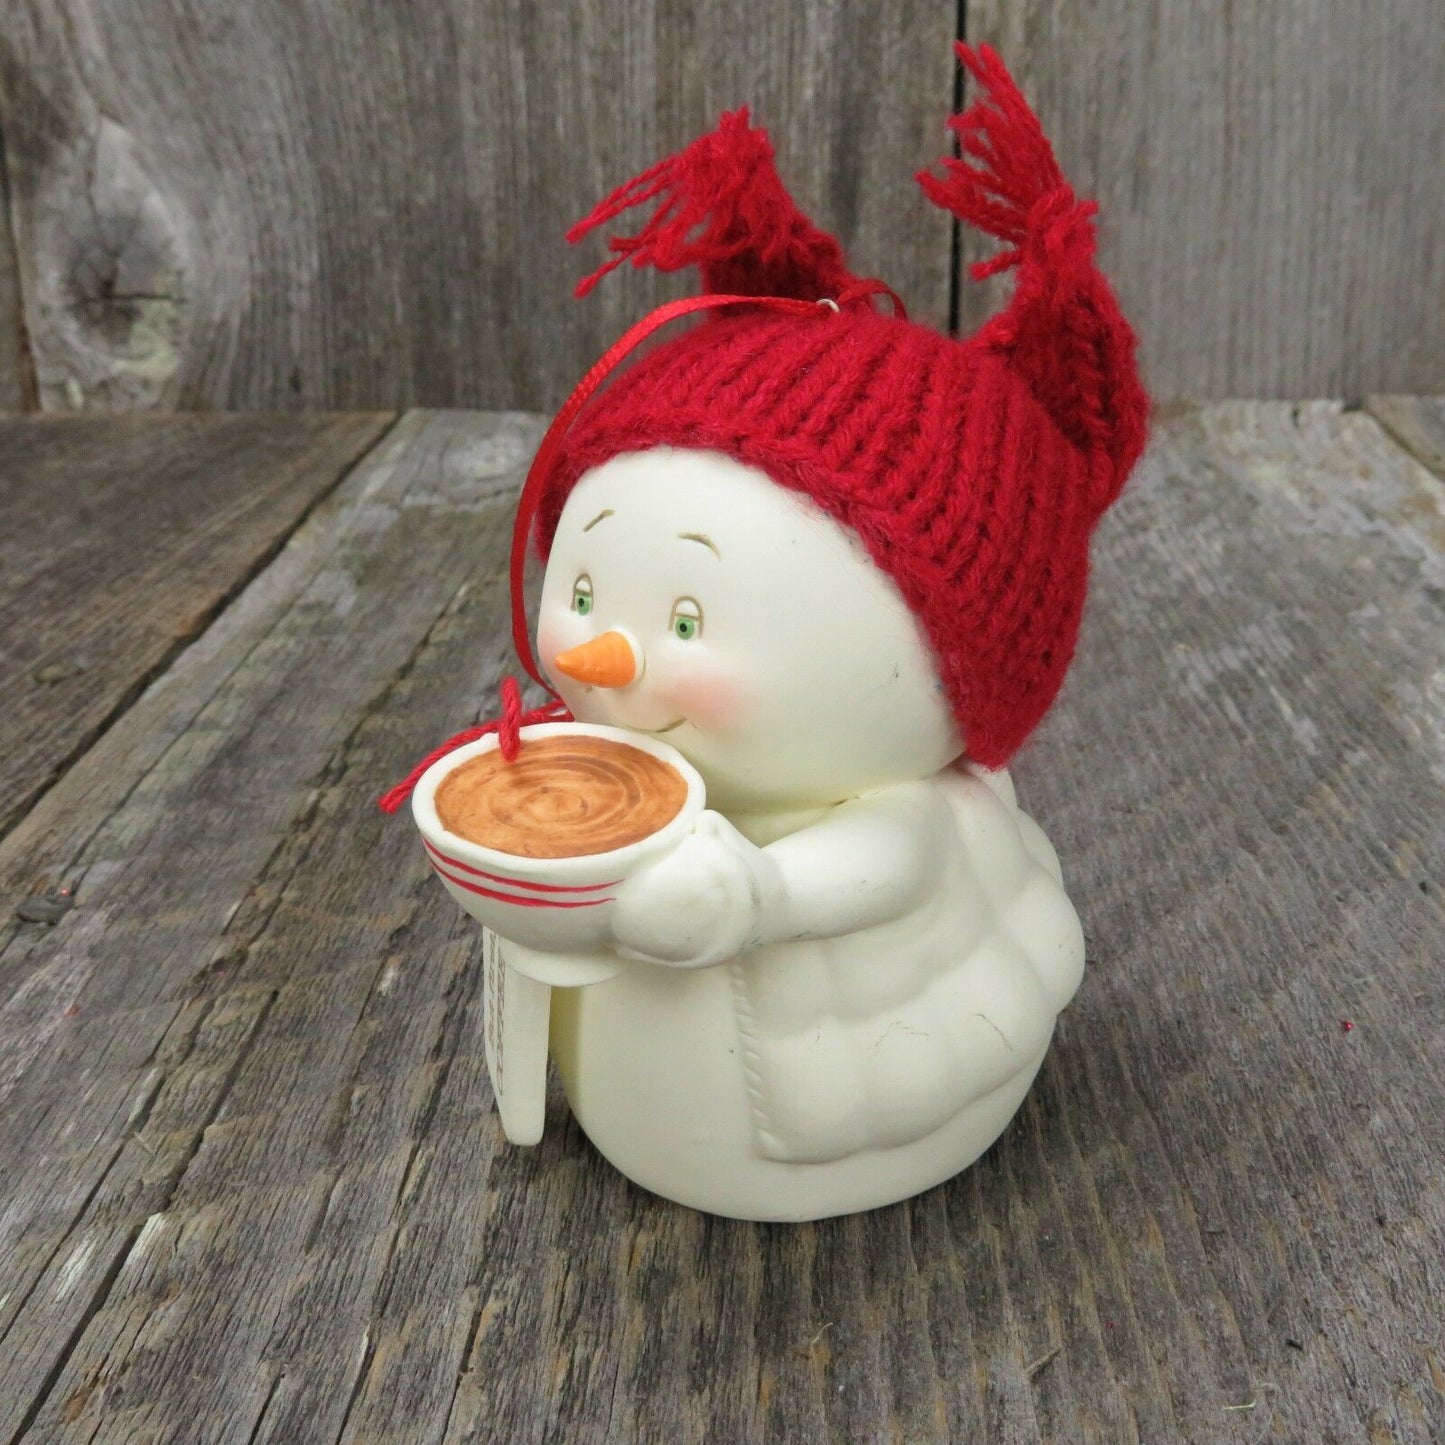 First Coffee Snowman Christmas Ornament Department 56 Bisque Porcelain Ceramic - At Grandma's Table